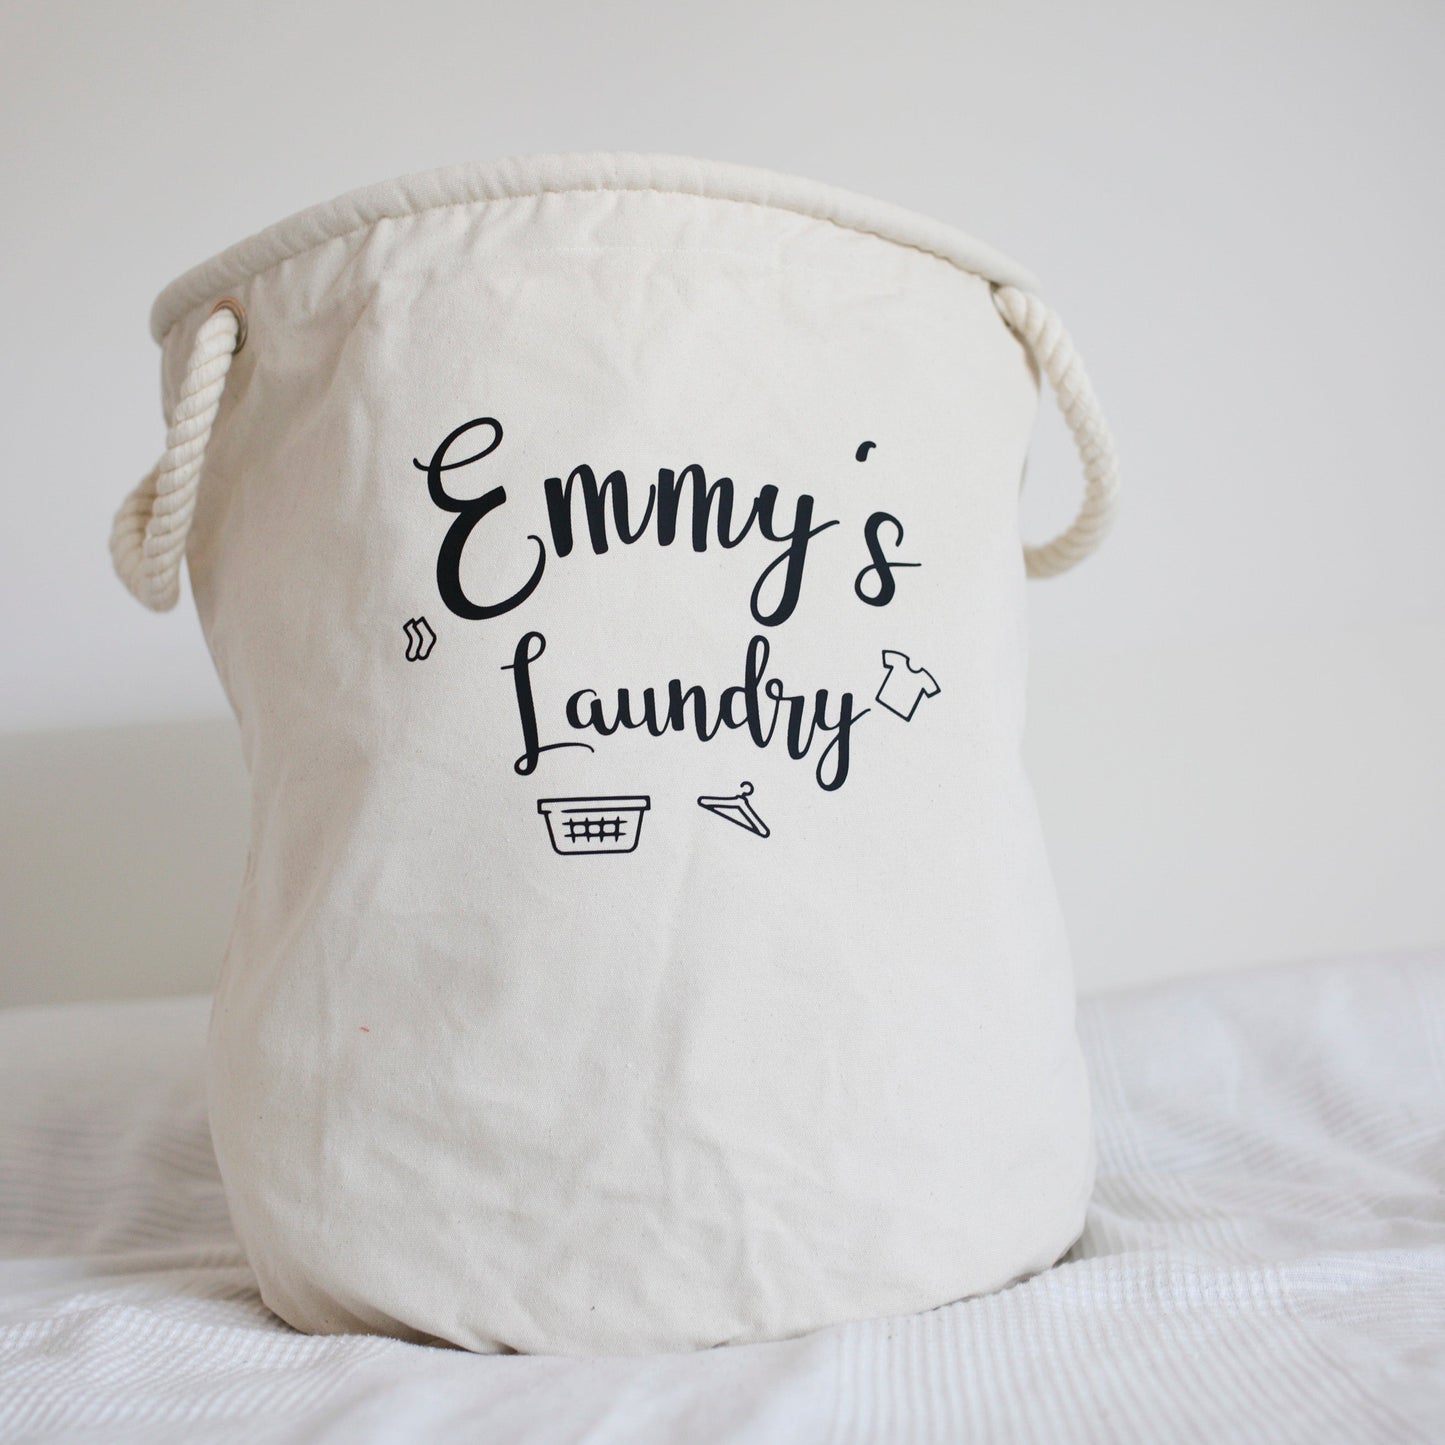 Load image into Gallery viewer, Personalised Grey Canvas Laundry Basket
